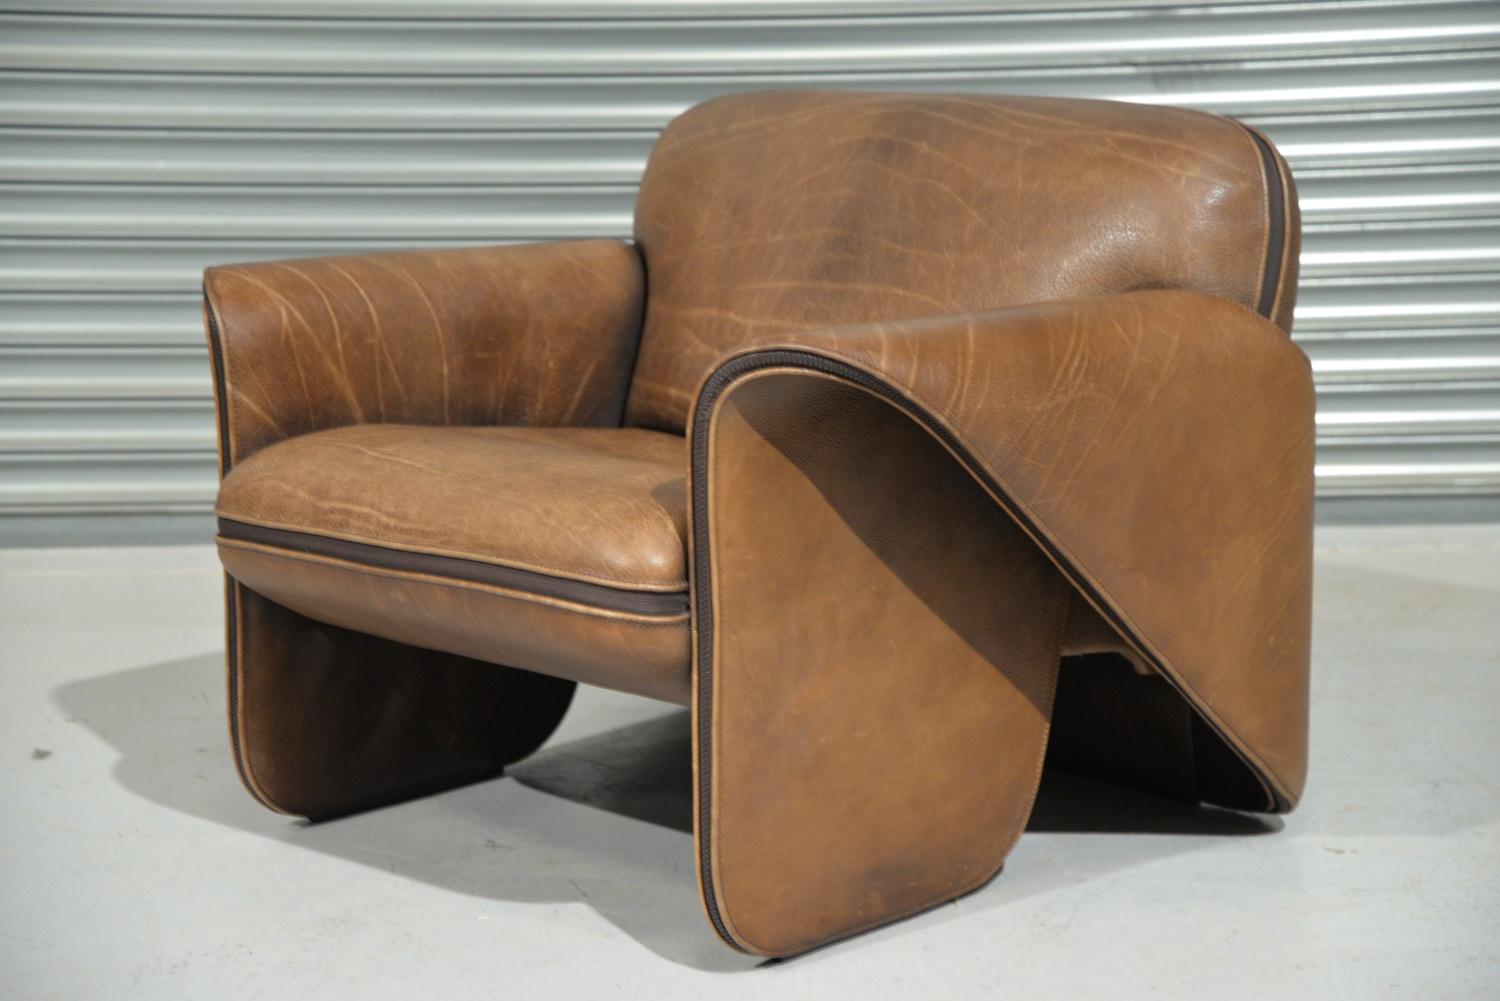 Discounted airfreight for our International customers (from 2 weeks door to door)

Ultra rare vintage De Sede DS 125 armchair by Gerd Lange in 1978. These sculptural pieces are upholstered in 3mm-5mm thick neck leather with a decorative zipper